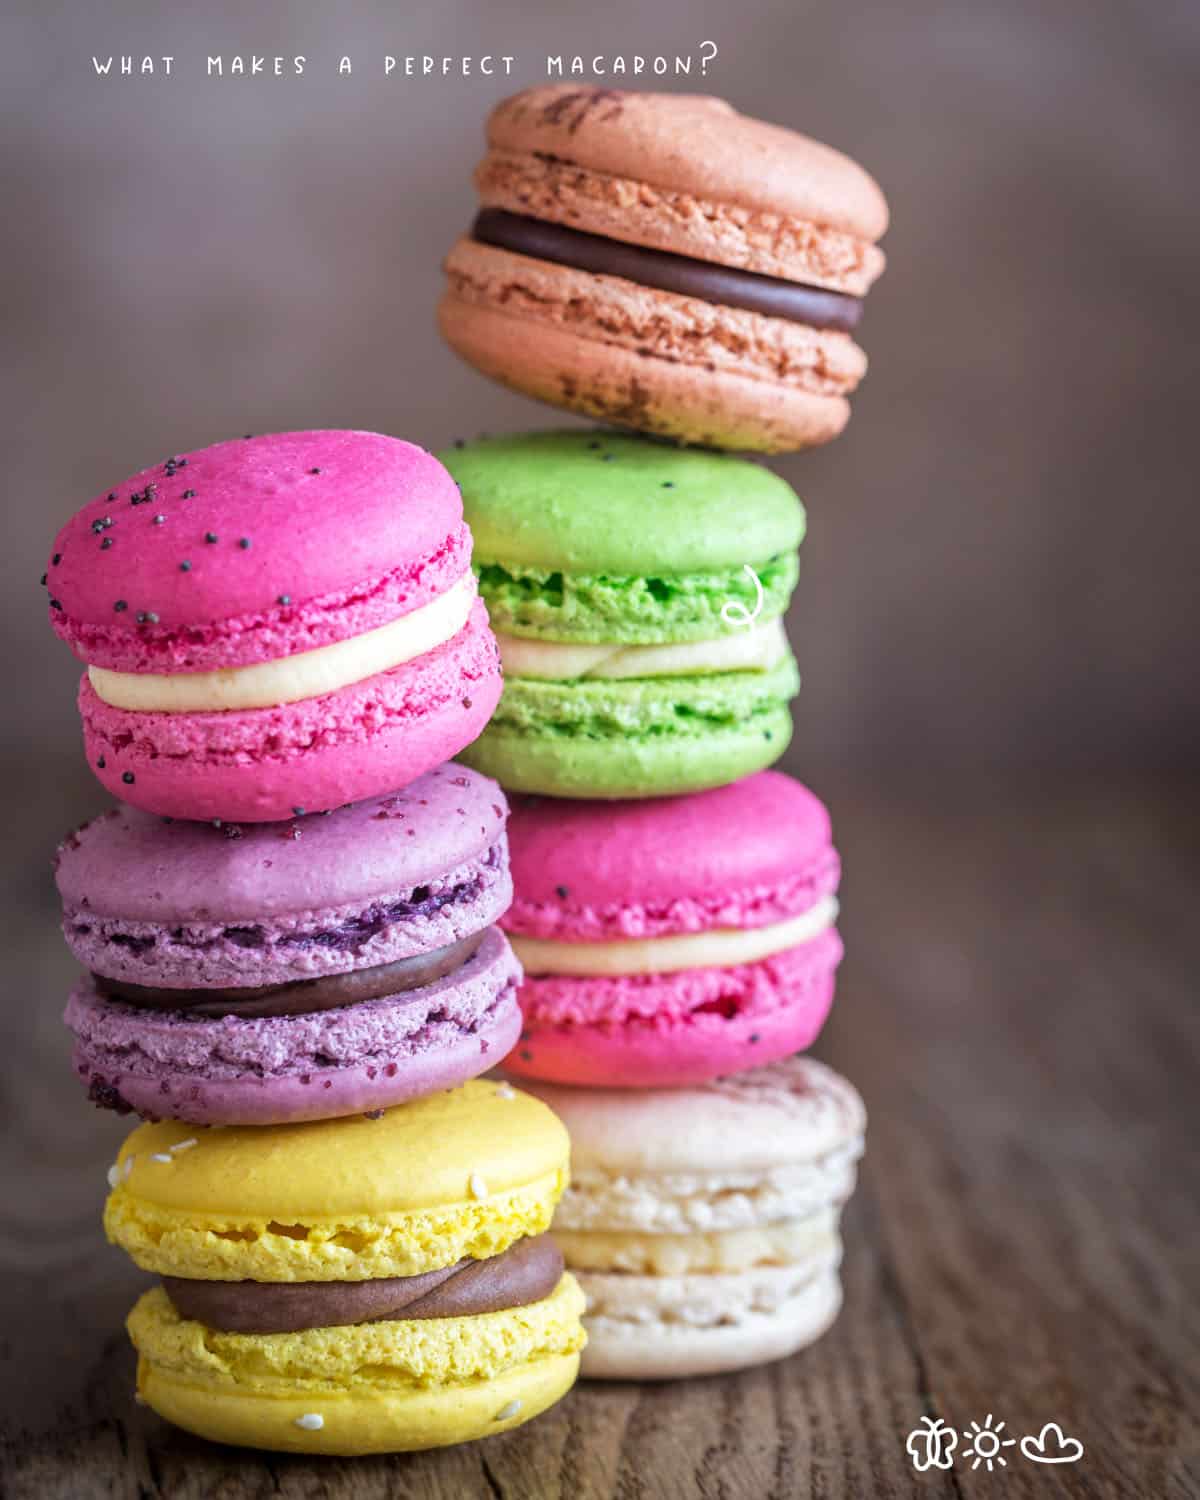 A perfect macaron should have a smooth, shiny shell with no cracks or uneven edges. It should not be too runny or too thick.